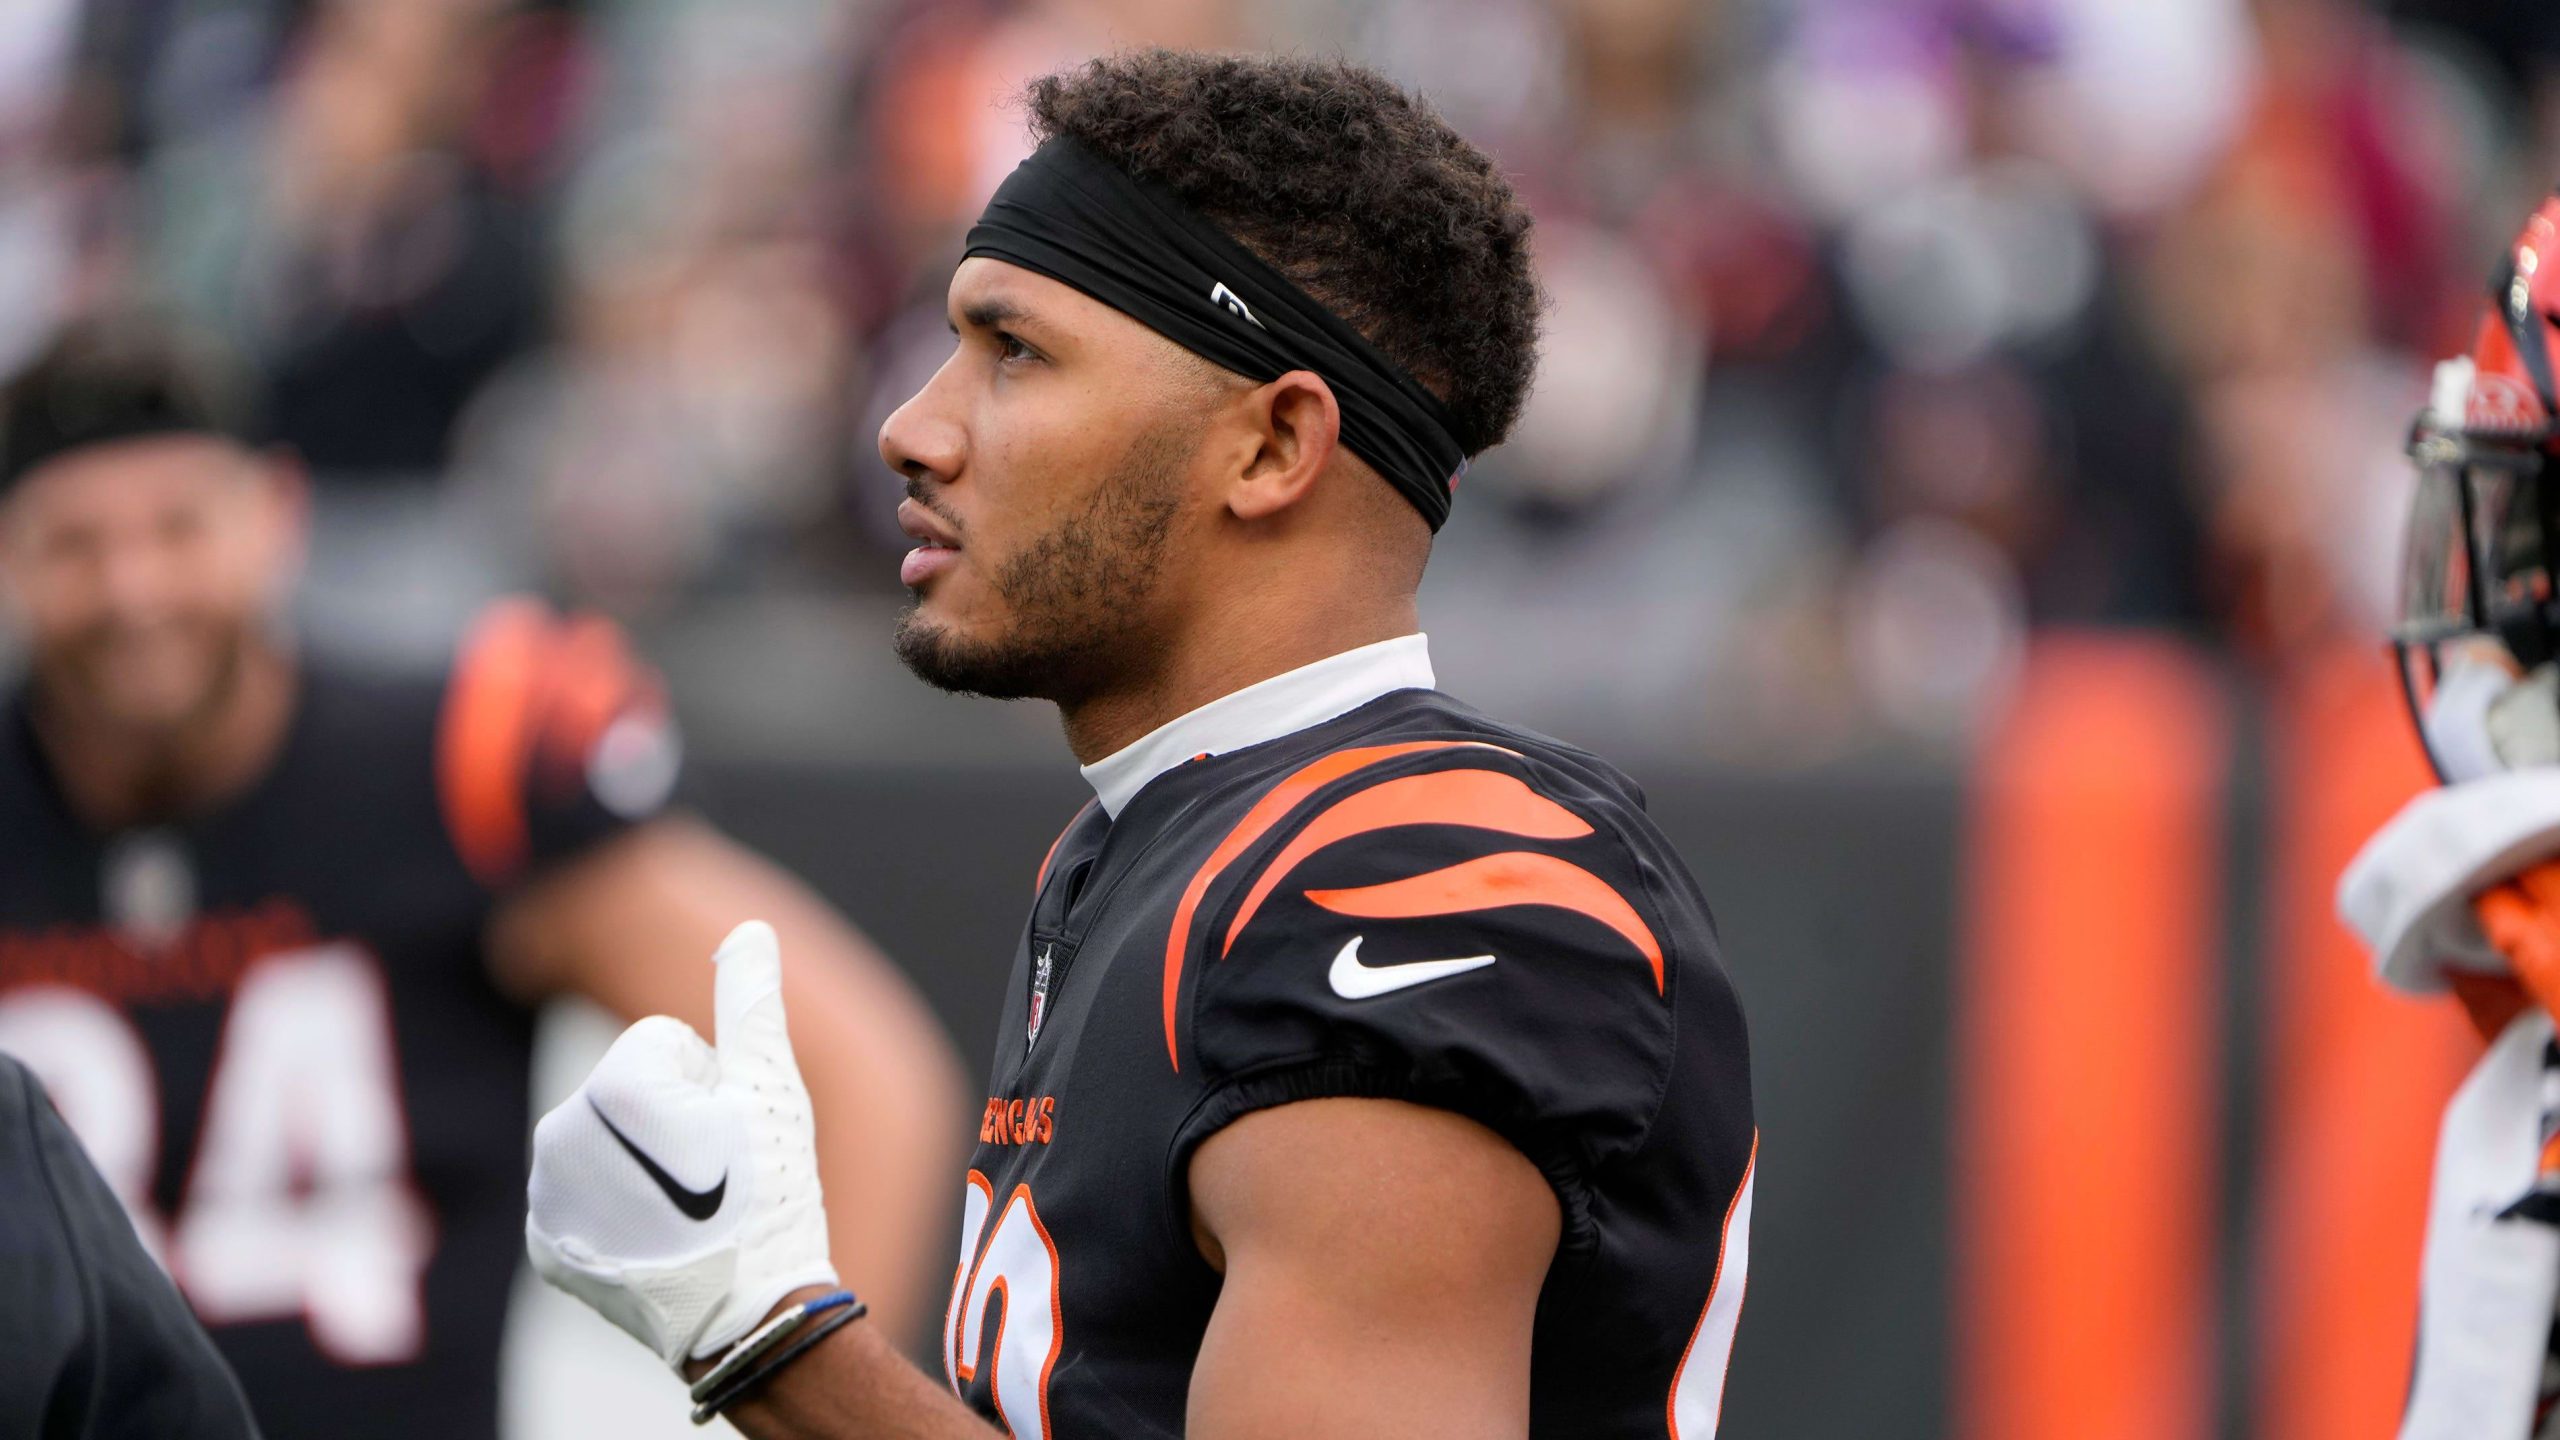  Tyler Boyd's NFL Free Agency Saga: A Strategic Play for His Next Move